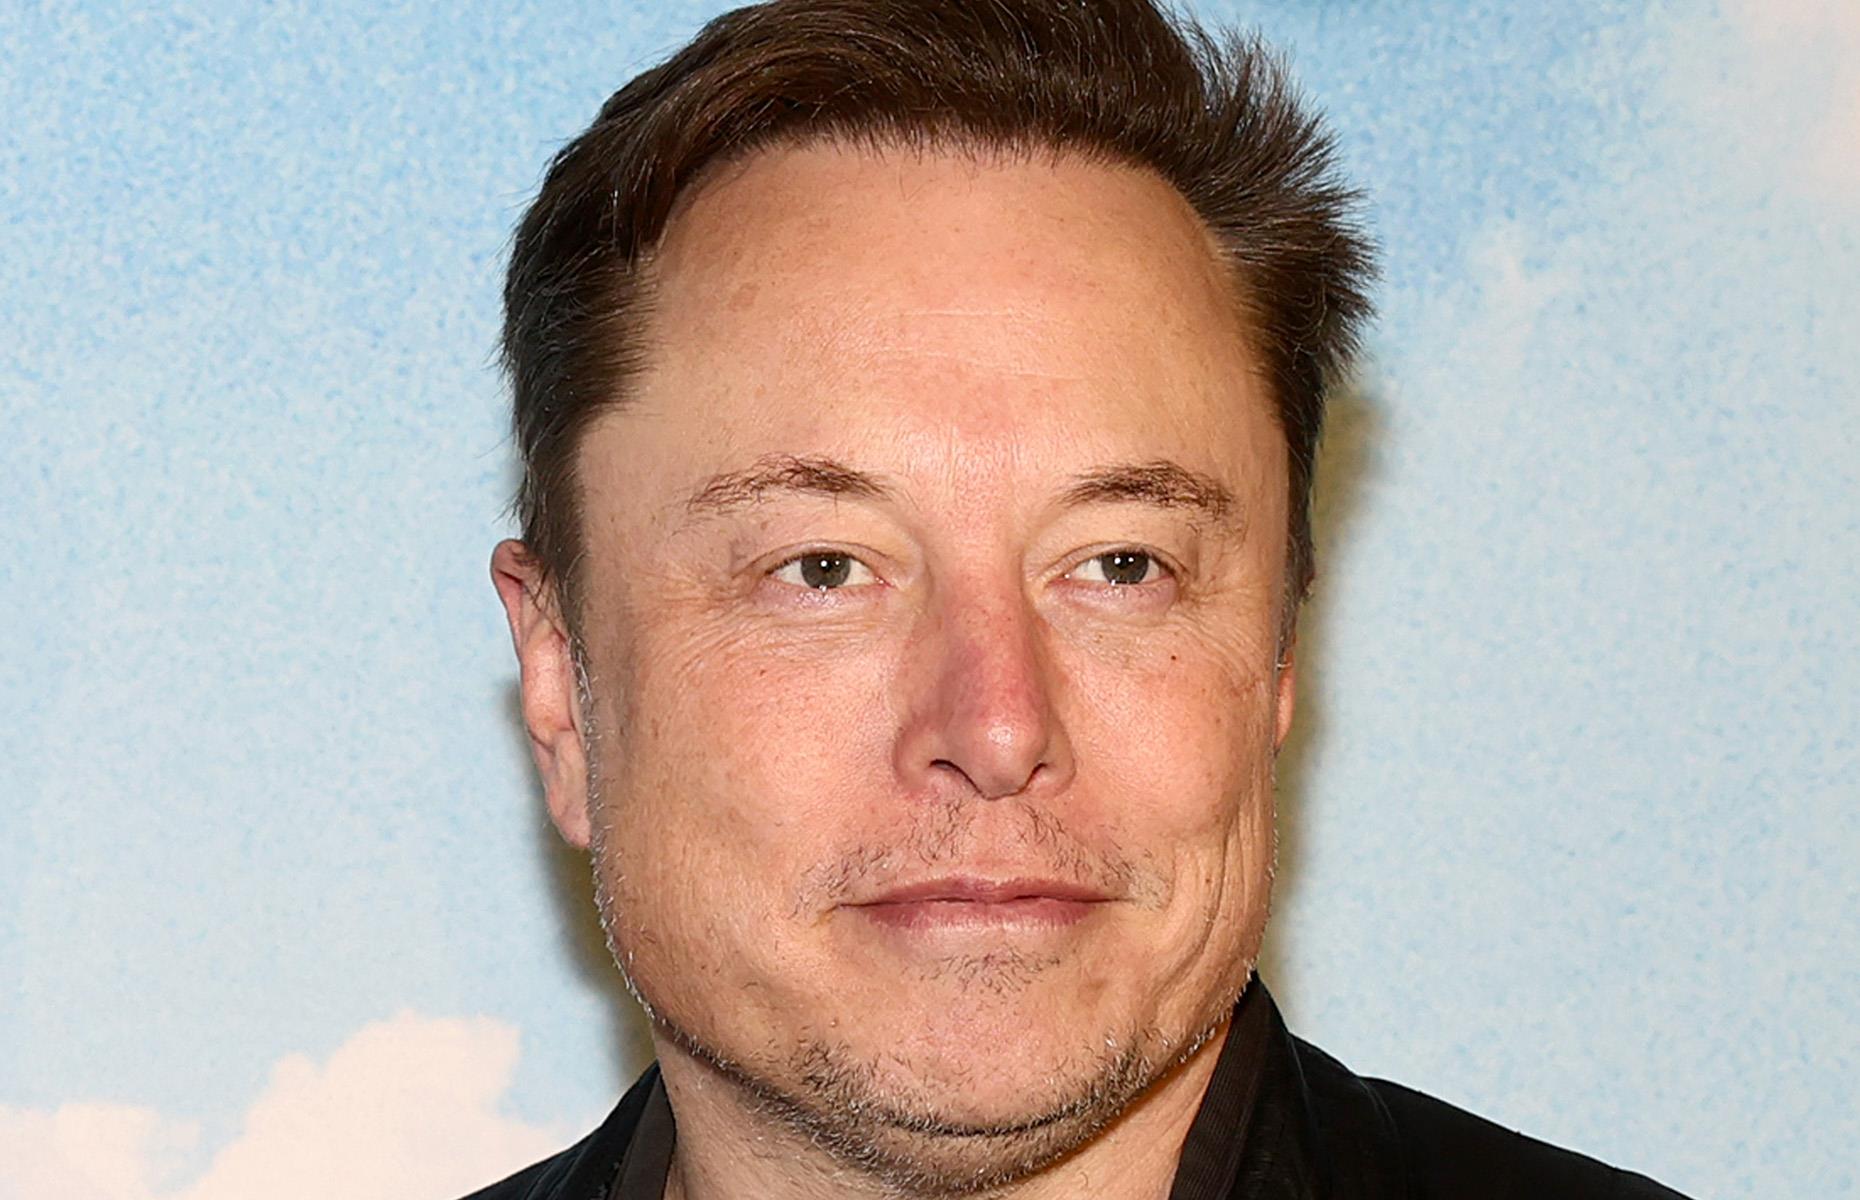 <p>Musk's controversial activities on social media once again came under scrutiny earlier this year, during a libel deposition in which he admitted to having two secret X accounts, known as "burner" accounts.</p>  <p>This deposition coincides with Musk being sued over a series of tweets from last June, in which he claimed that a 22-year-old Jewish man named Ben Brody had participated in a neo-Nazi rally as an undercover agent provocateur. Brody is seeking damages for harassment and threats he suffered as a result of Musk's tweets.</p>  <p>Musk confessed to owning one test account that he rarely uses and a "side" account from which he anonymously tweets more regularly. While the court transcript referred to one account as "baby smoke 9,000," it appears to be a misnomer for @babysmurf9000, an account that has shown signs of affiliation with Mr. Musk. The identity of the other suspected account, @ermnmusk, was confirmed by court exhibits reviewed by <em>HuffPost.</em></p>